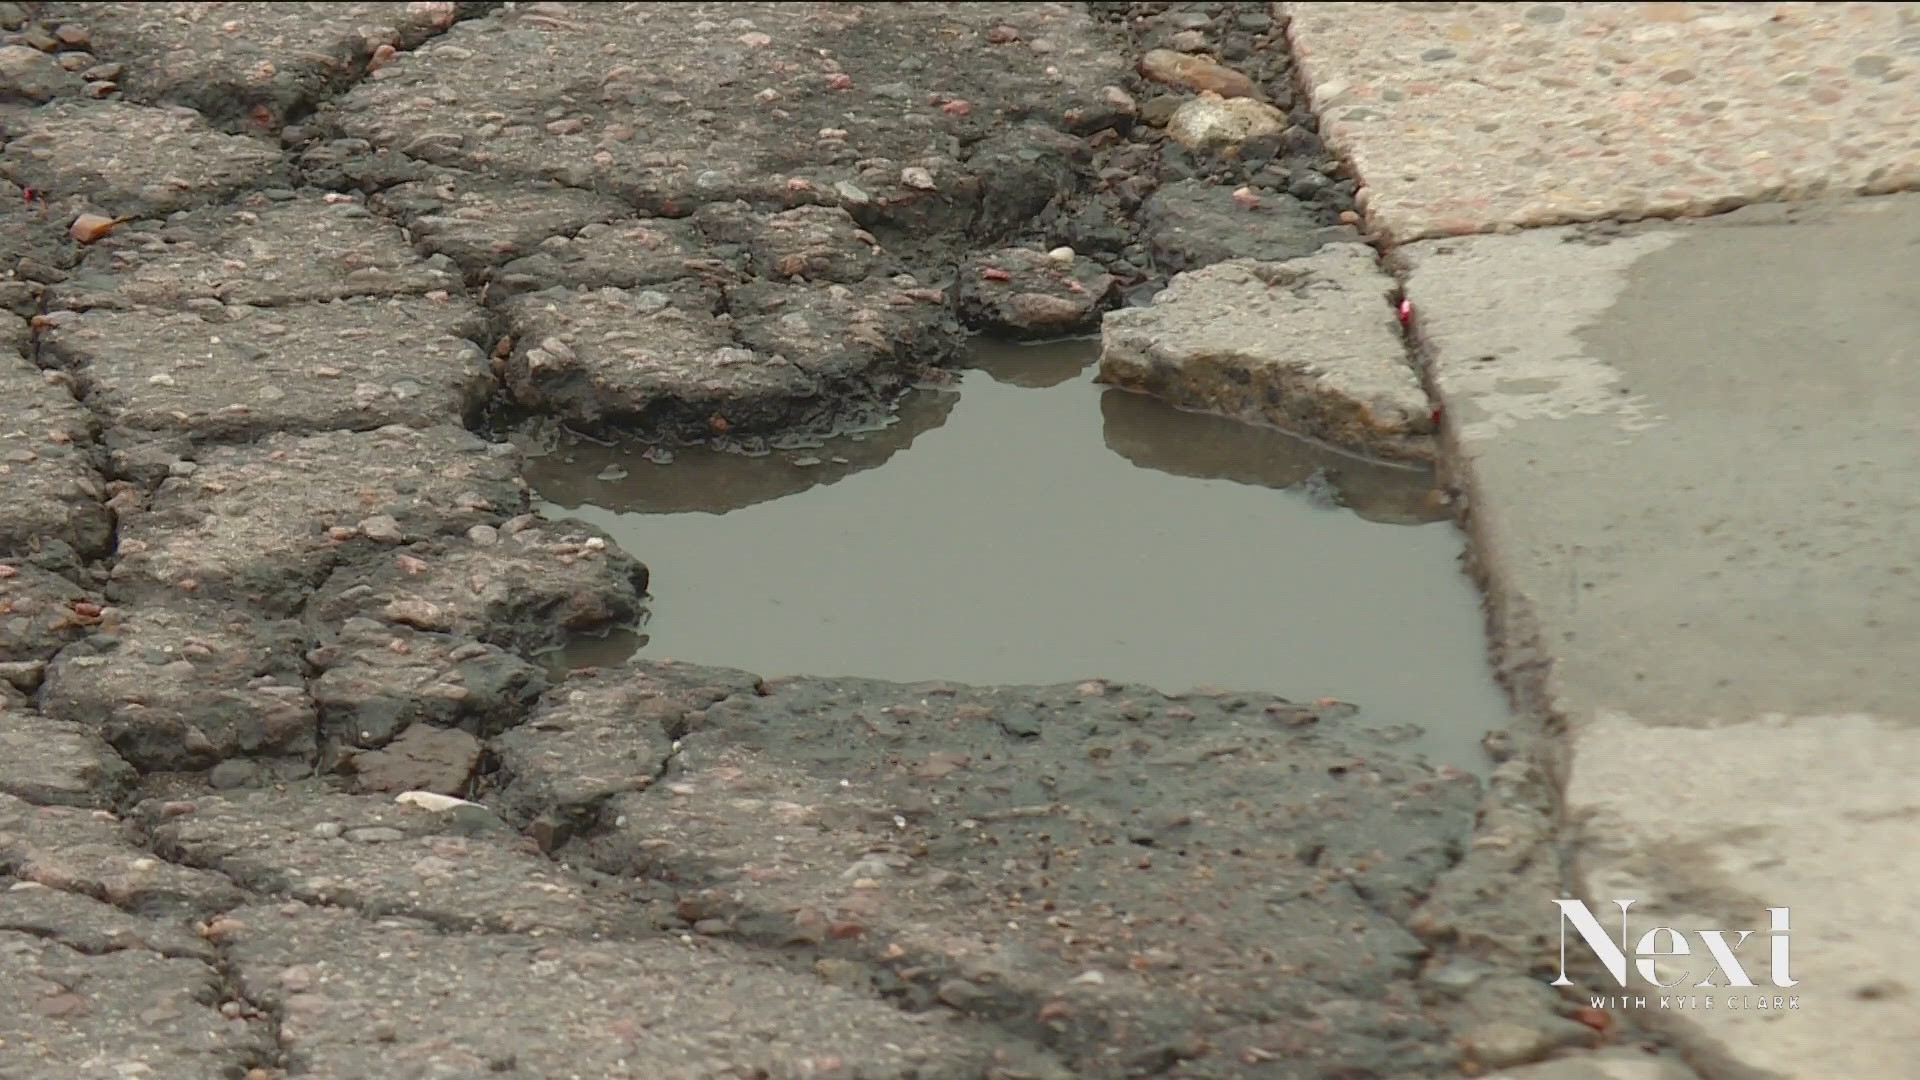 Nearly 500 have been reported in Denver since the last week of April. The city has filled 3,537 potholes so far in 2023. That’s 430 more than this time last year.